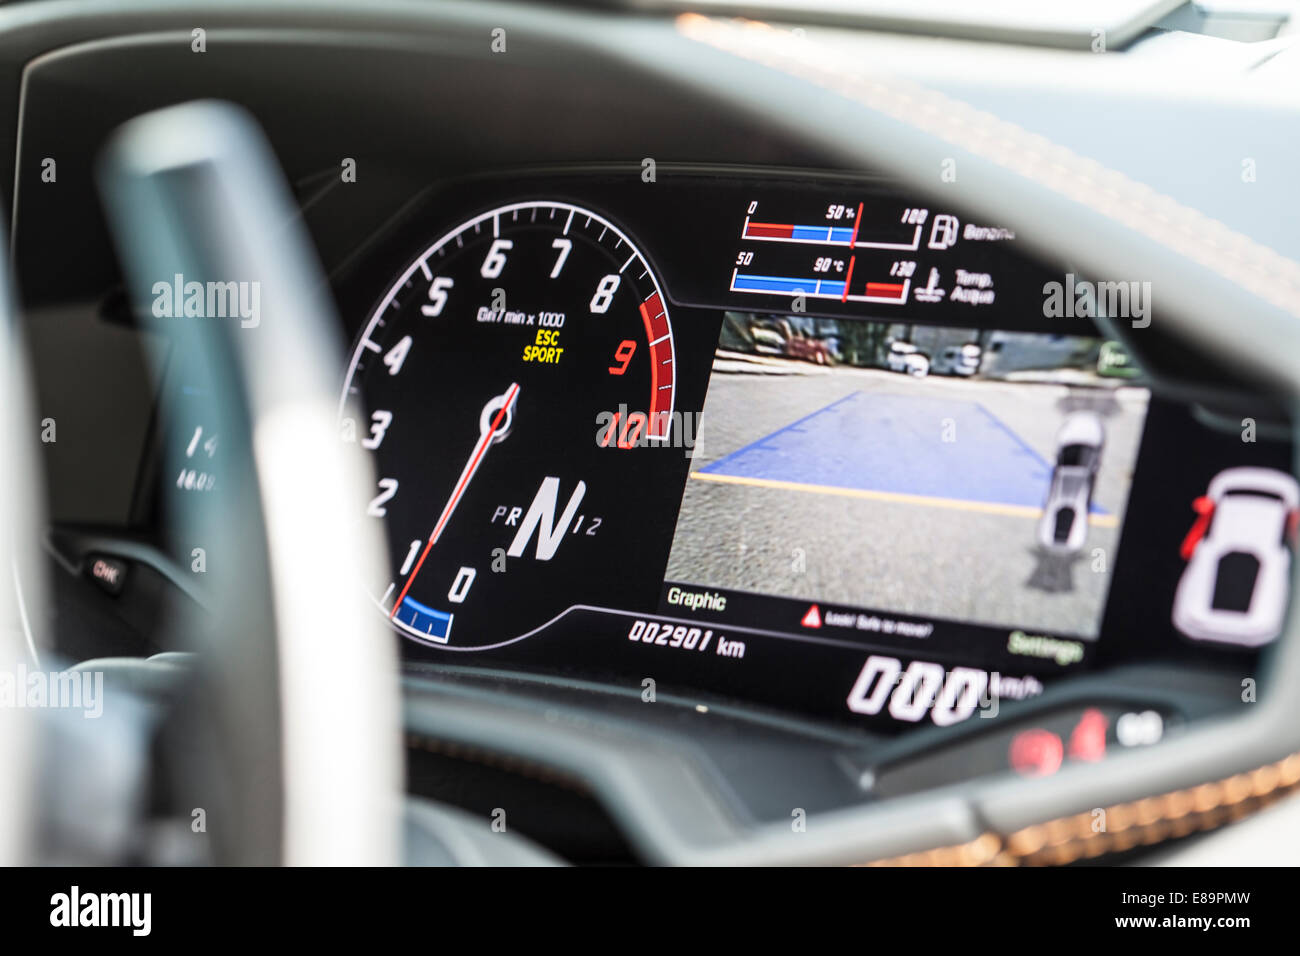 Aberdeen, Hong Kong, 18th Sep, 2014. View of the dashboard of the new Lamborghini Huracan sports car, parked near a shipyard. Photoshoot for Asia Pacific Boating Magazine. Stock Photo